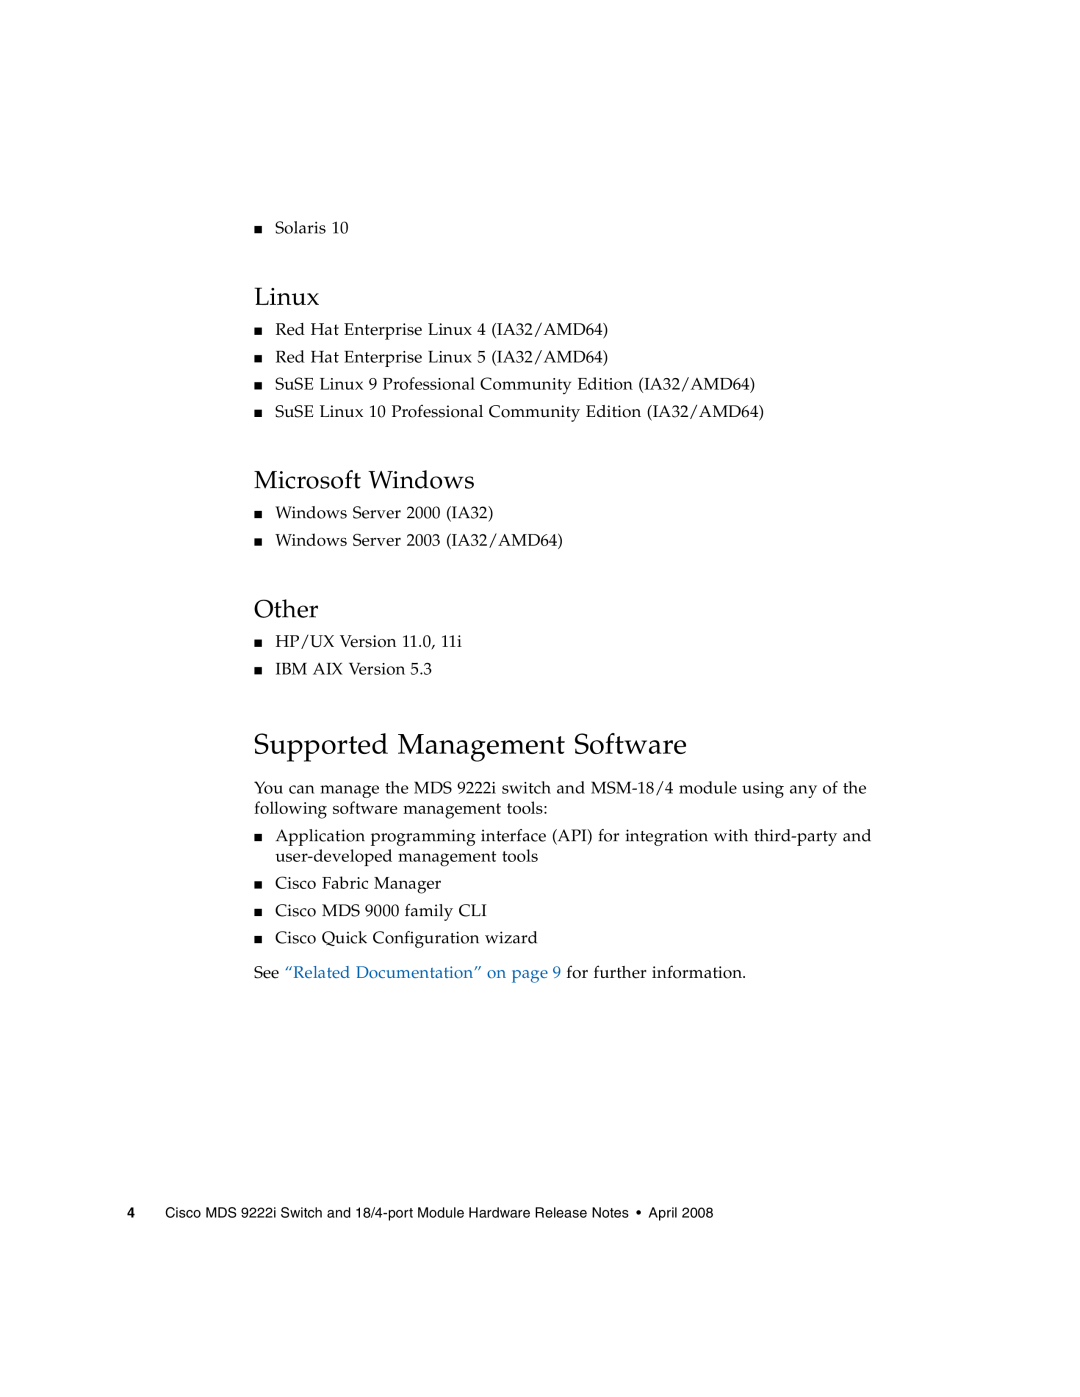 Sun Microsystems MDS 9222i manual Supported Management Software, Linux, Microsoft Windows, Other 